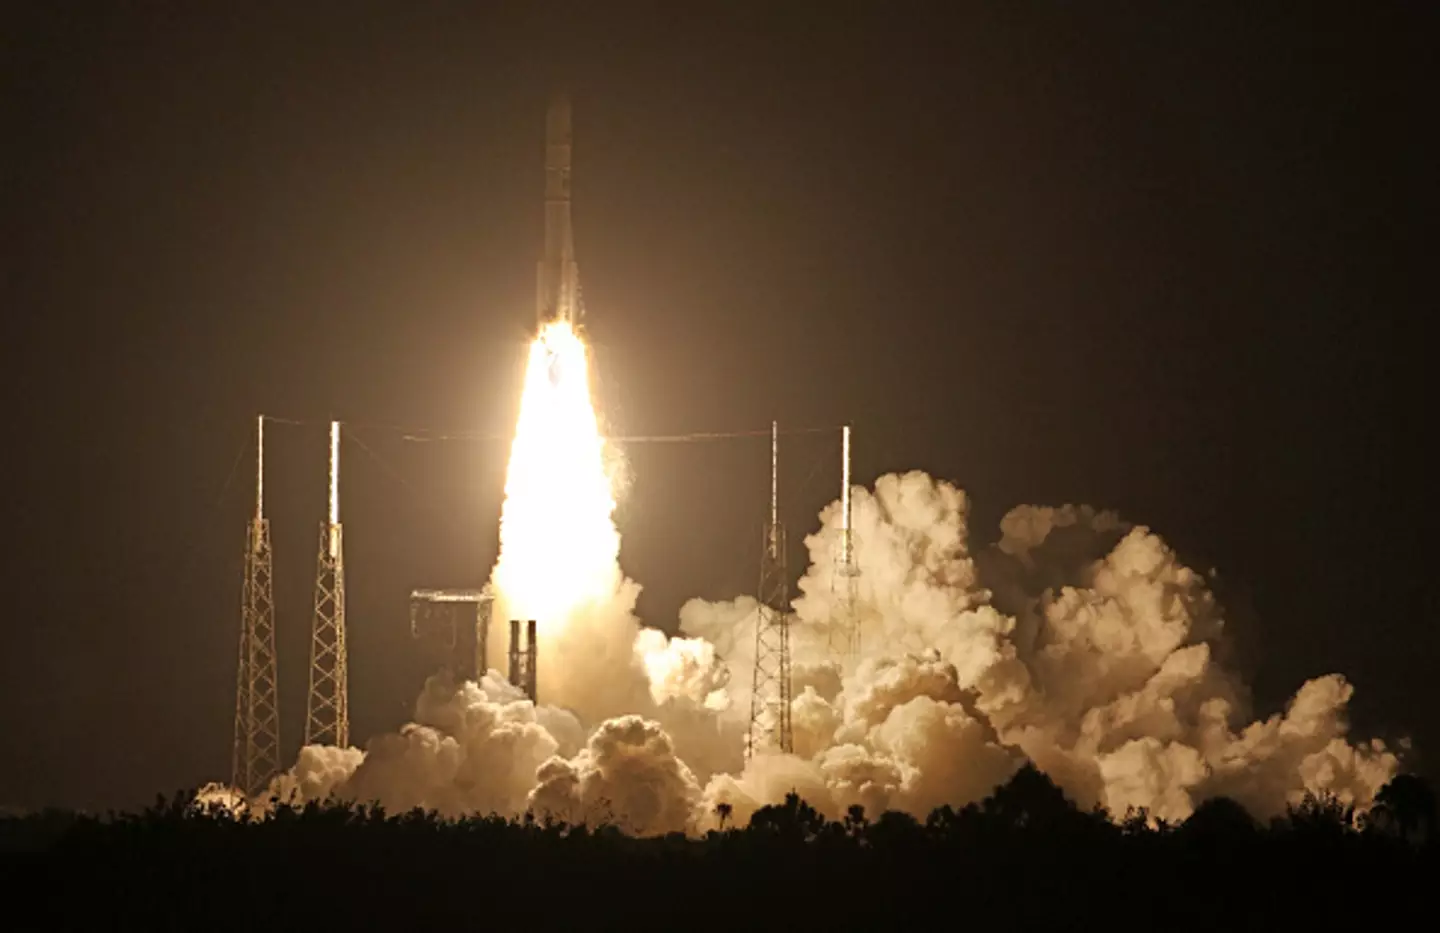 The spacecraft successfully launched earlier today (8 January).